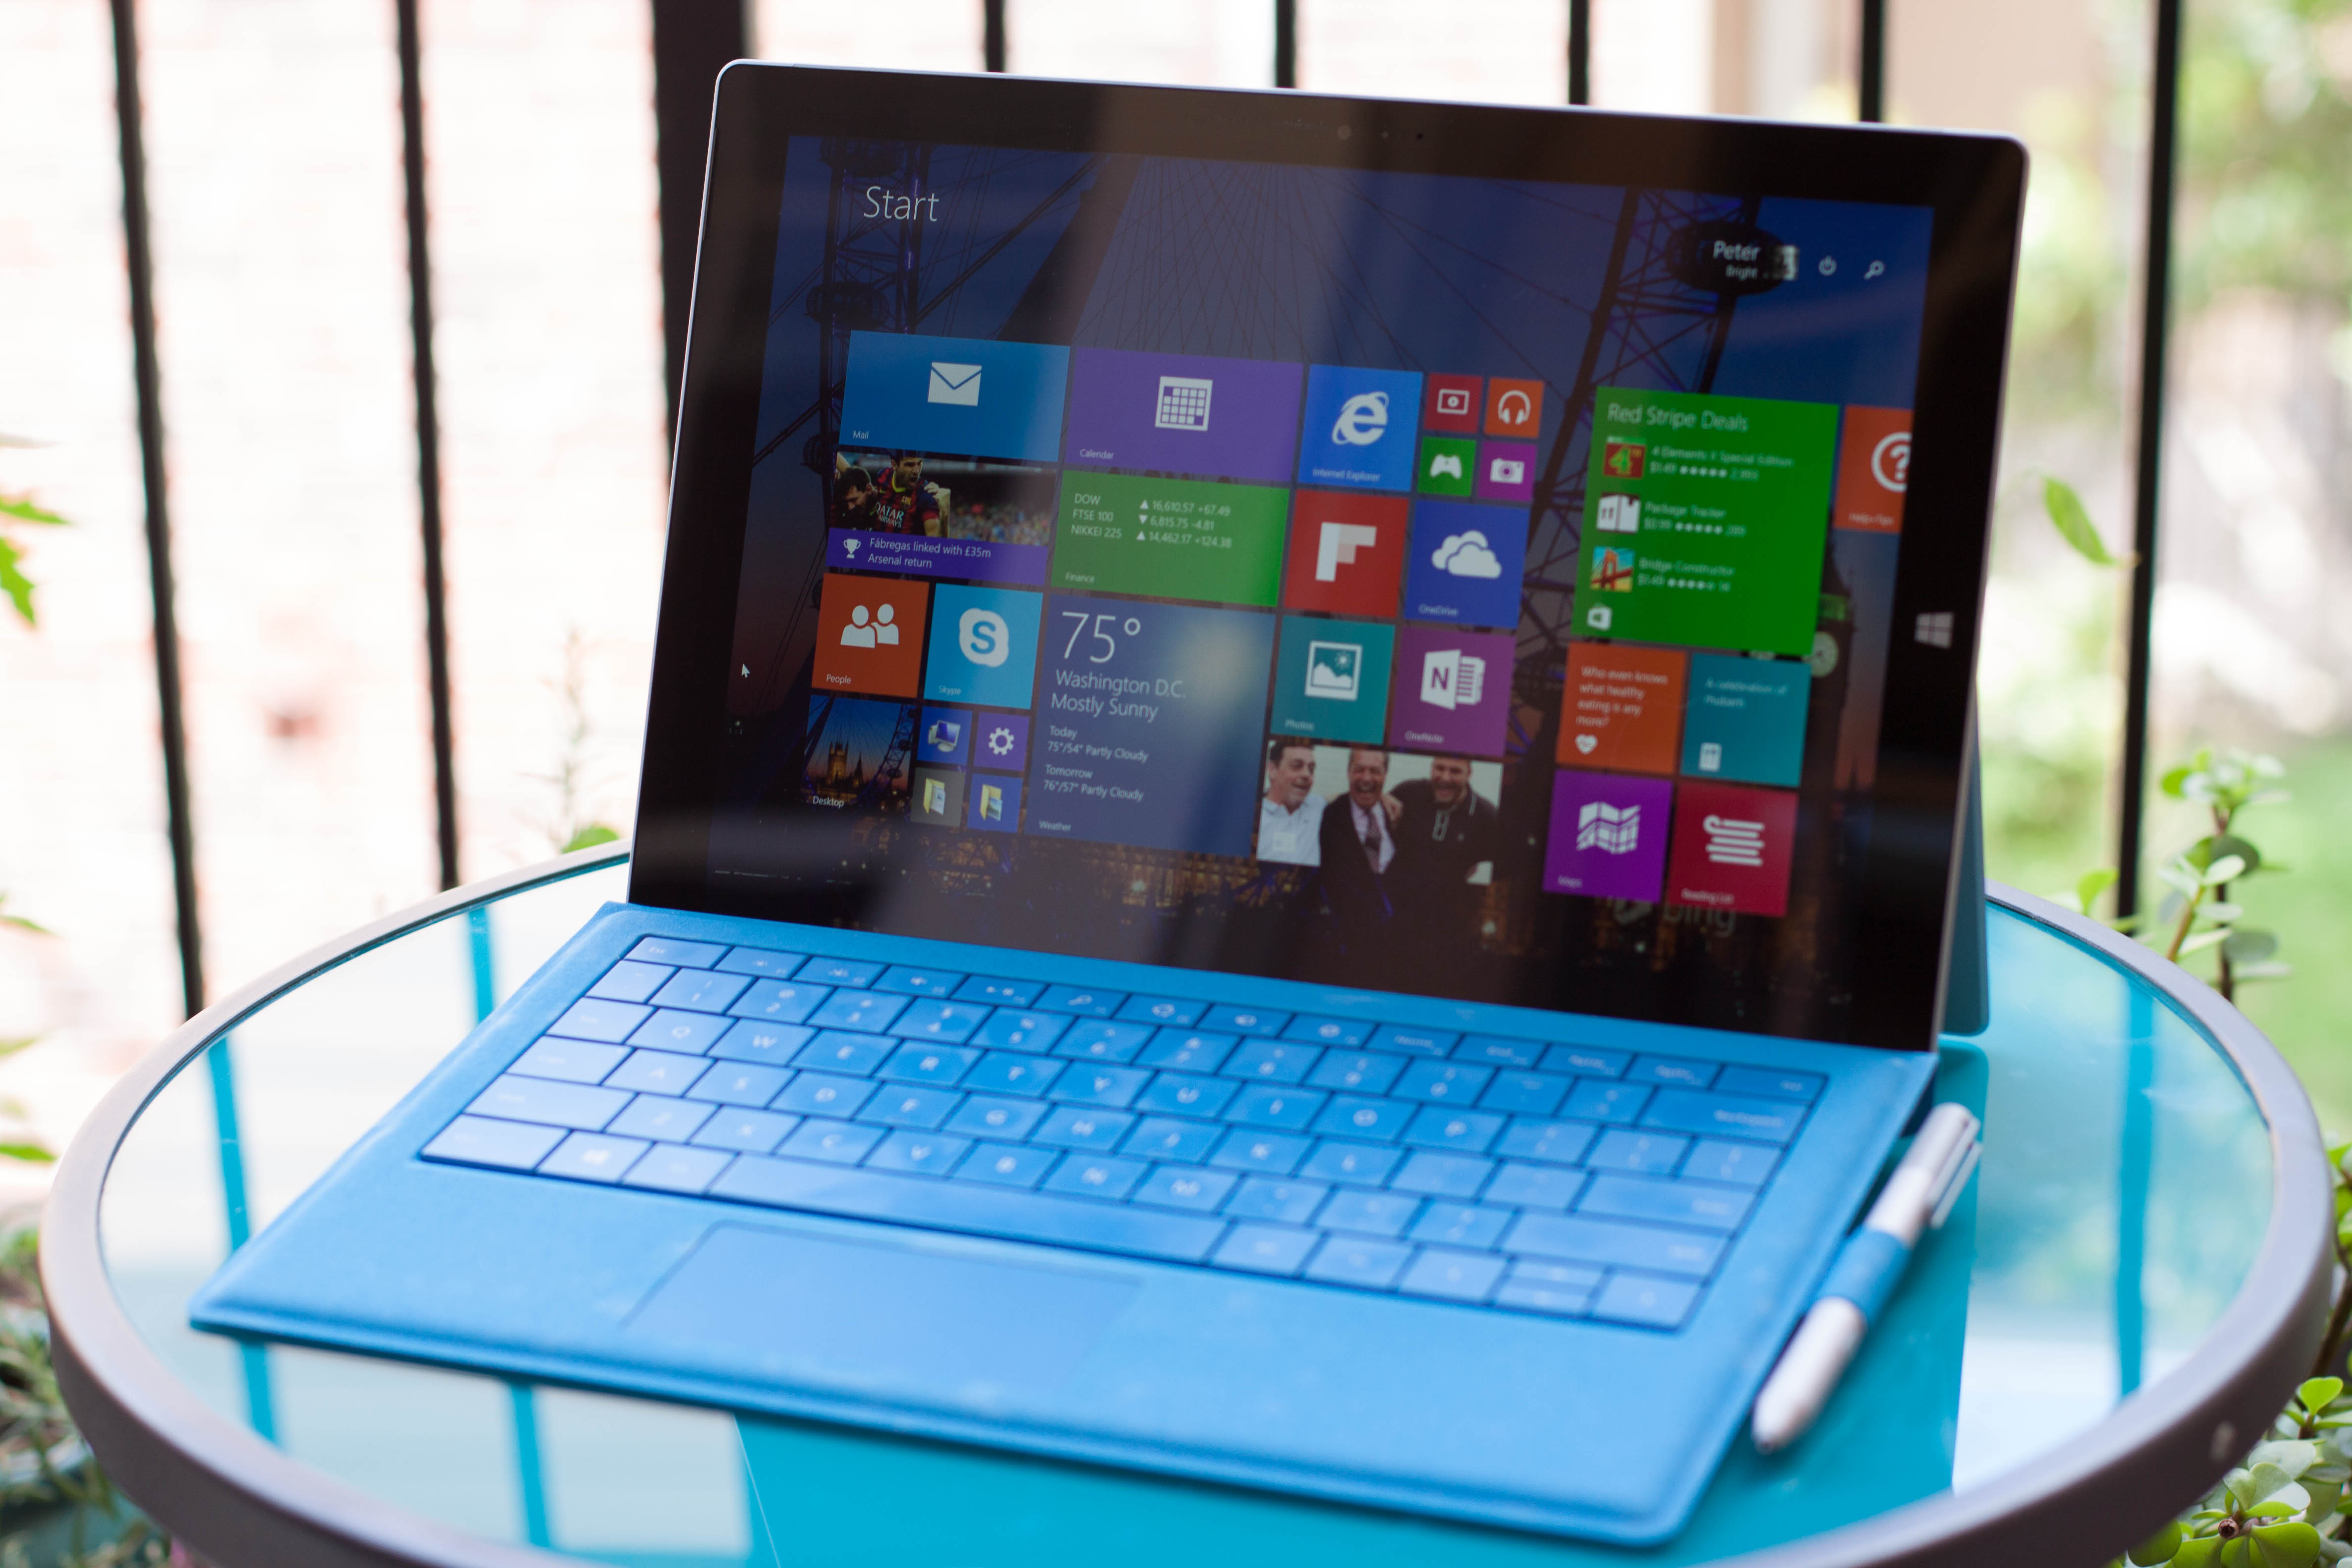 Surface Pro 3 review: Is the third time the charm? | Ars Technica